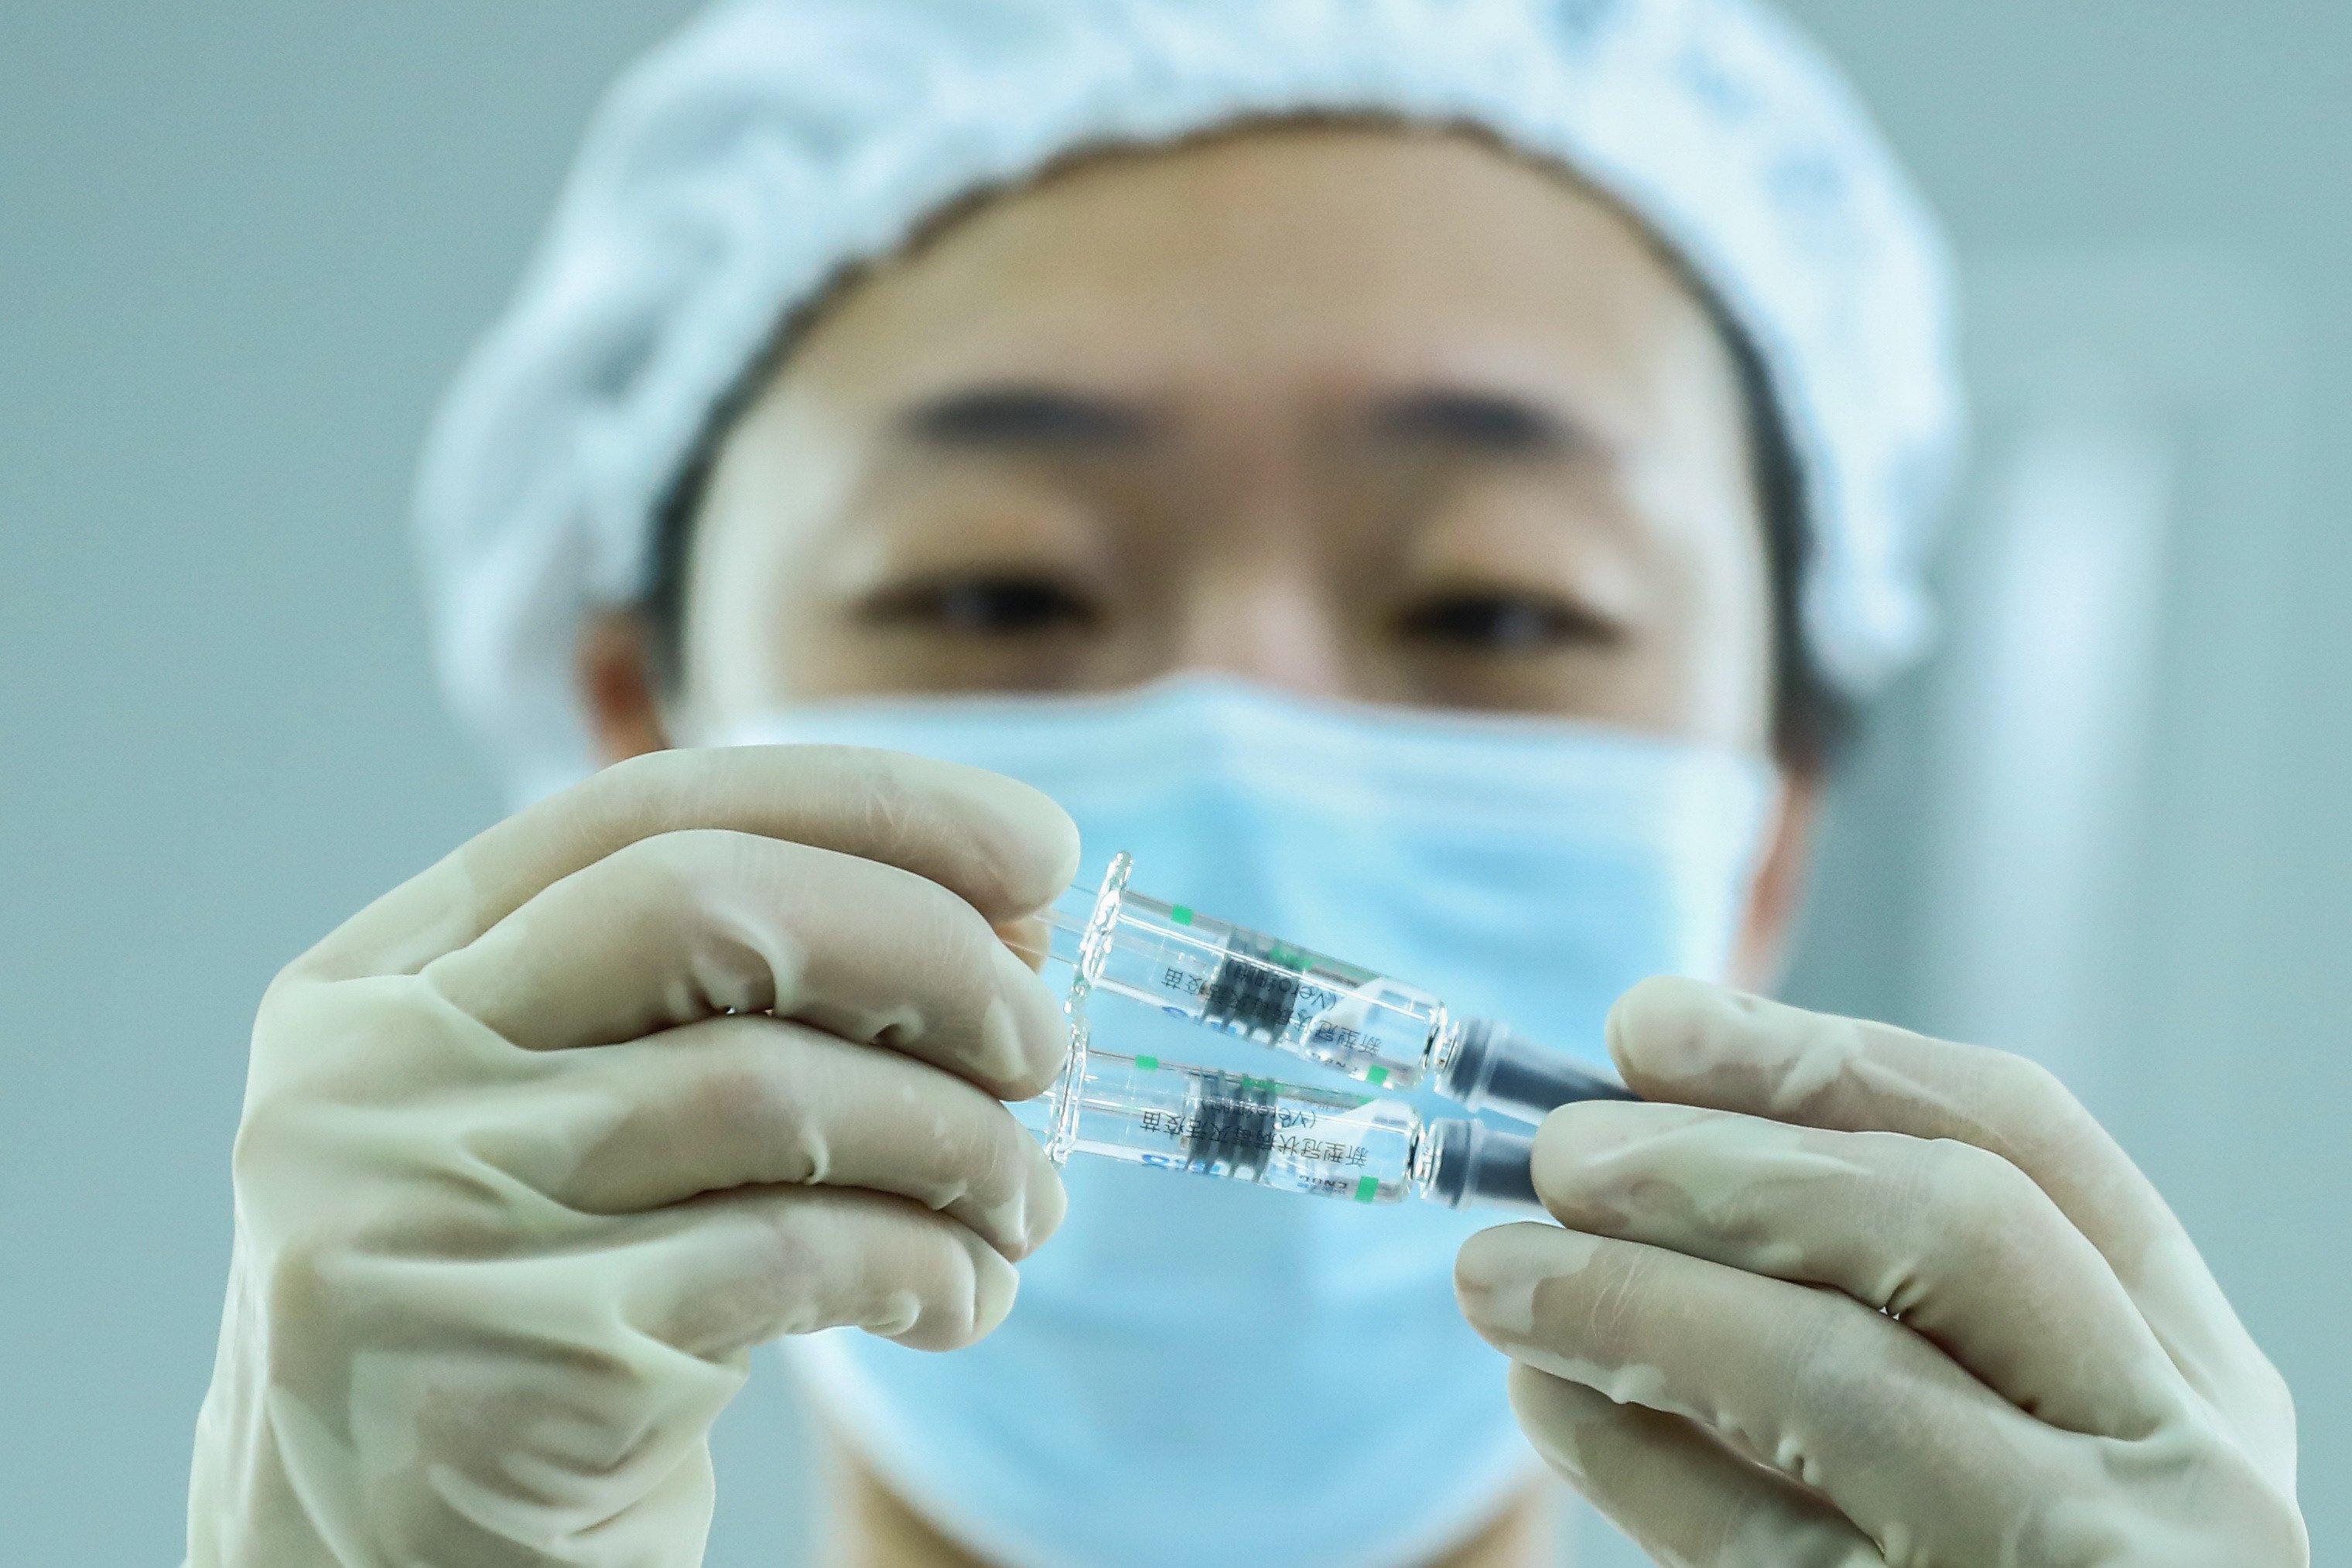 A staff member checks inactivated vaccines for Covid-19 at a Beijing Biological Products Institute packaging plant in Beijing in December 2020. Photo: Xinhua